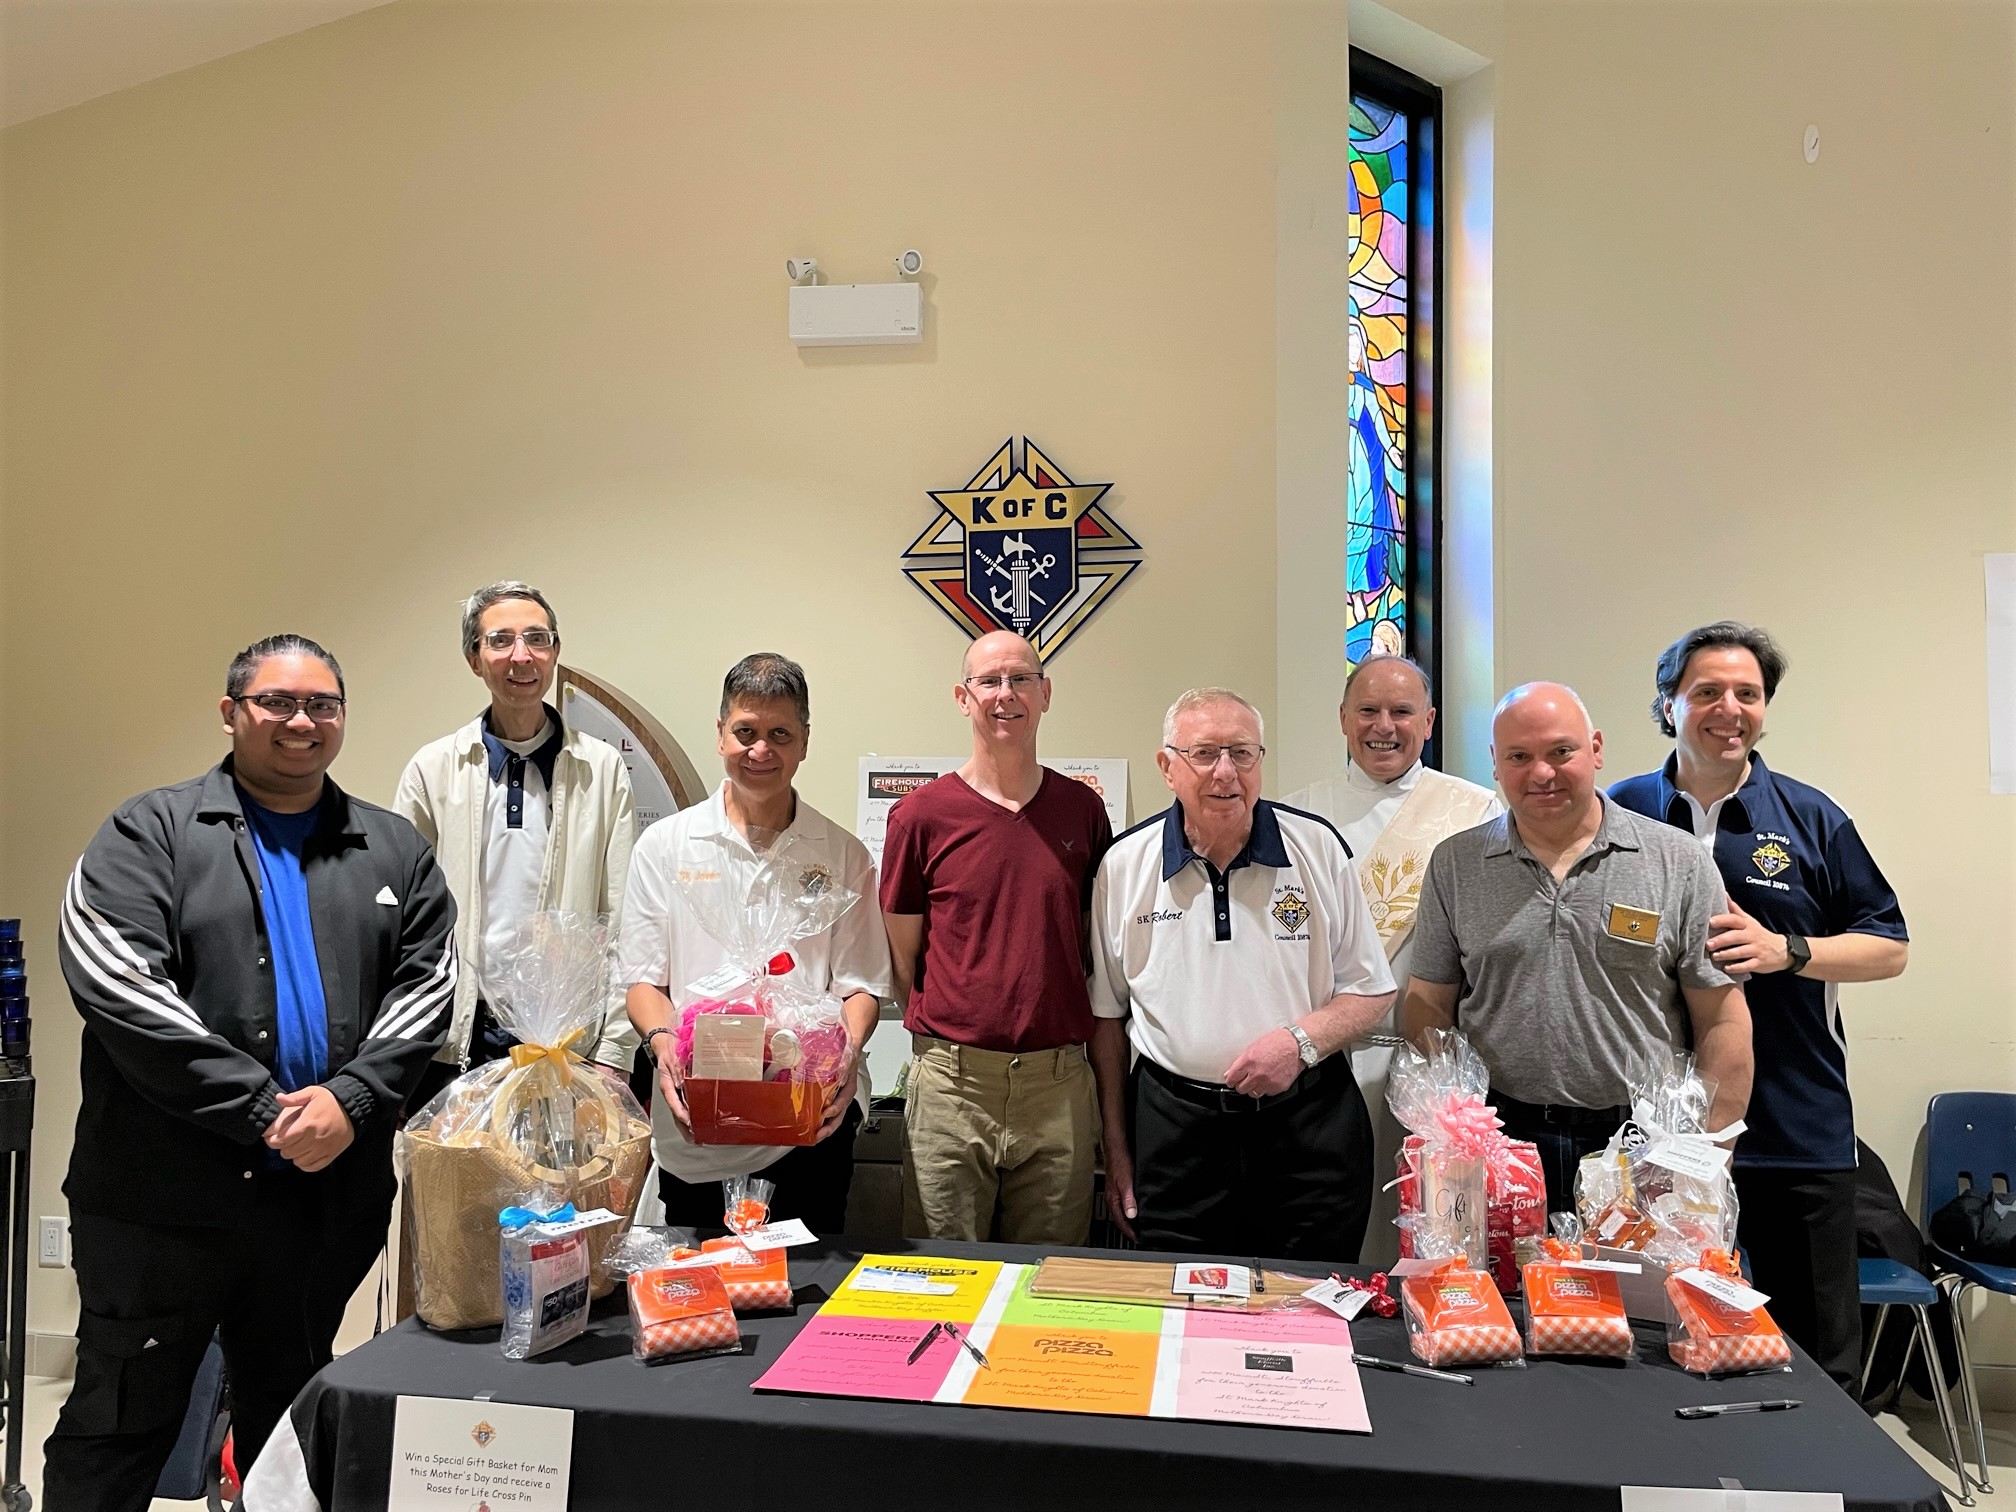 KofC Ontario Council 10874 -Mother's Day Raffle in support of March for Life